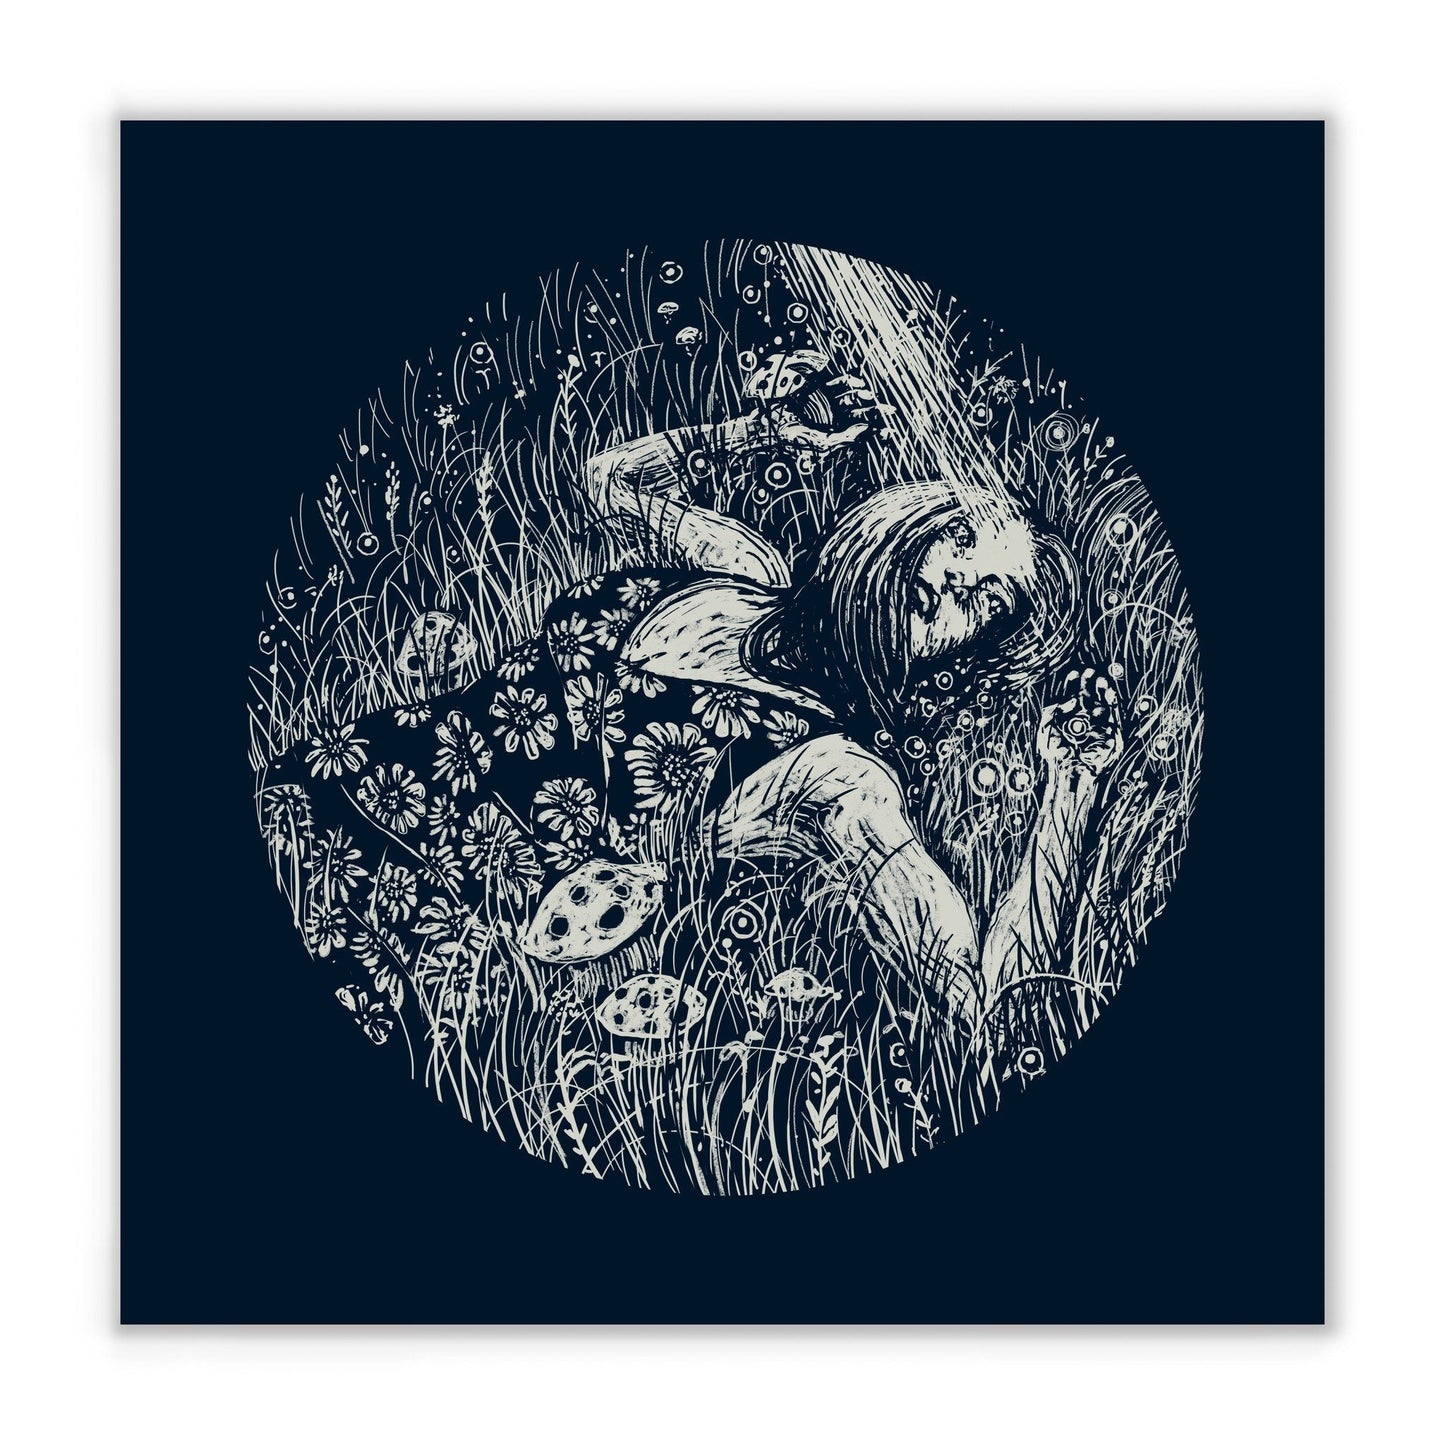 Untimely Death Number Four (Limited Edition of 50) Print James R. Eads